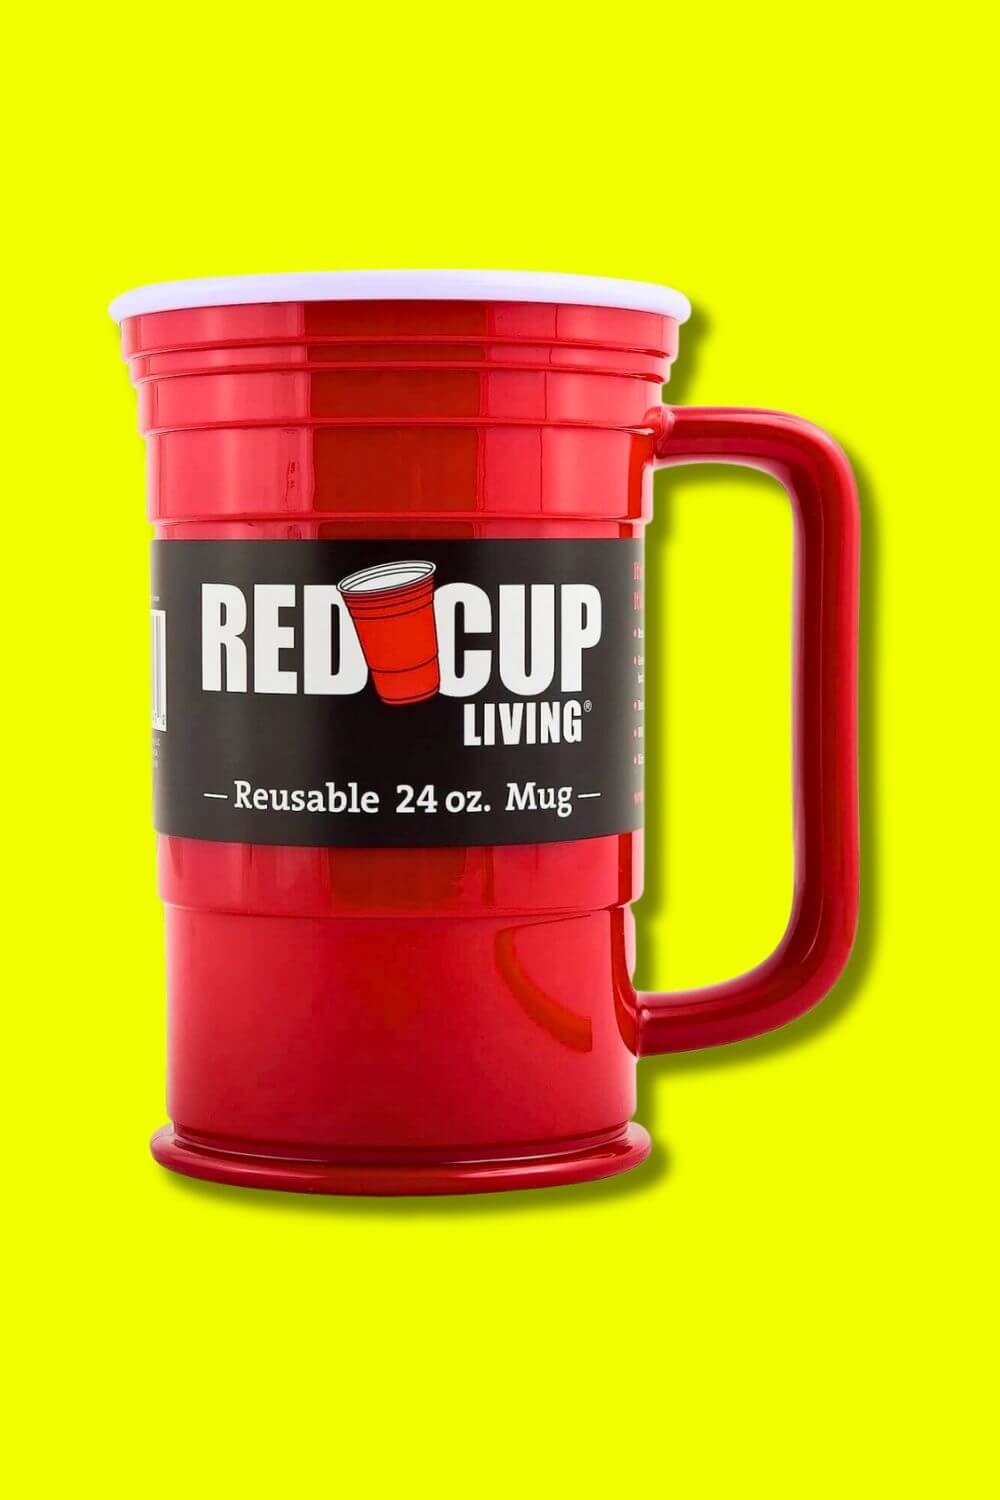 Red Cup Living Mug is a Classic Spin on the Good Ol' Red Plastic Cup